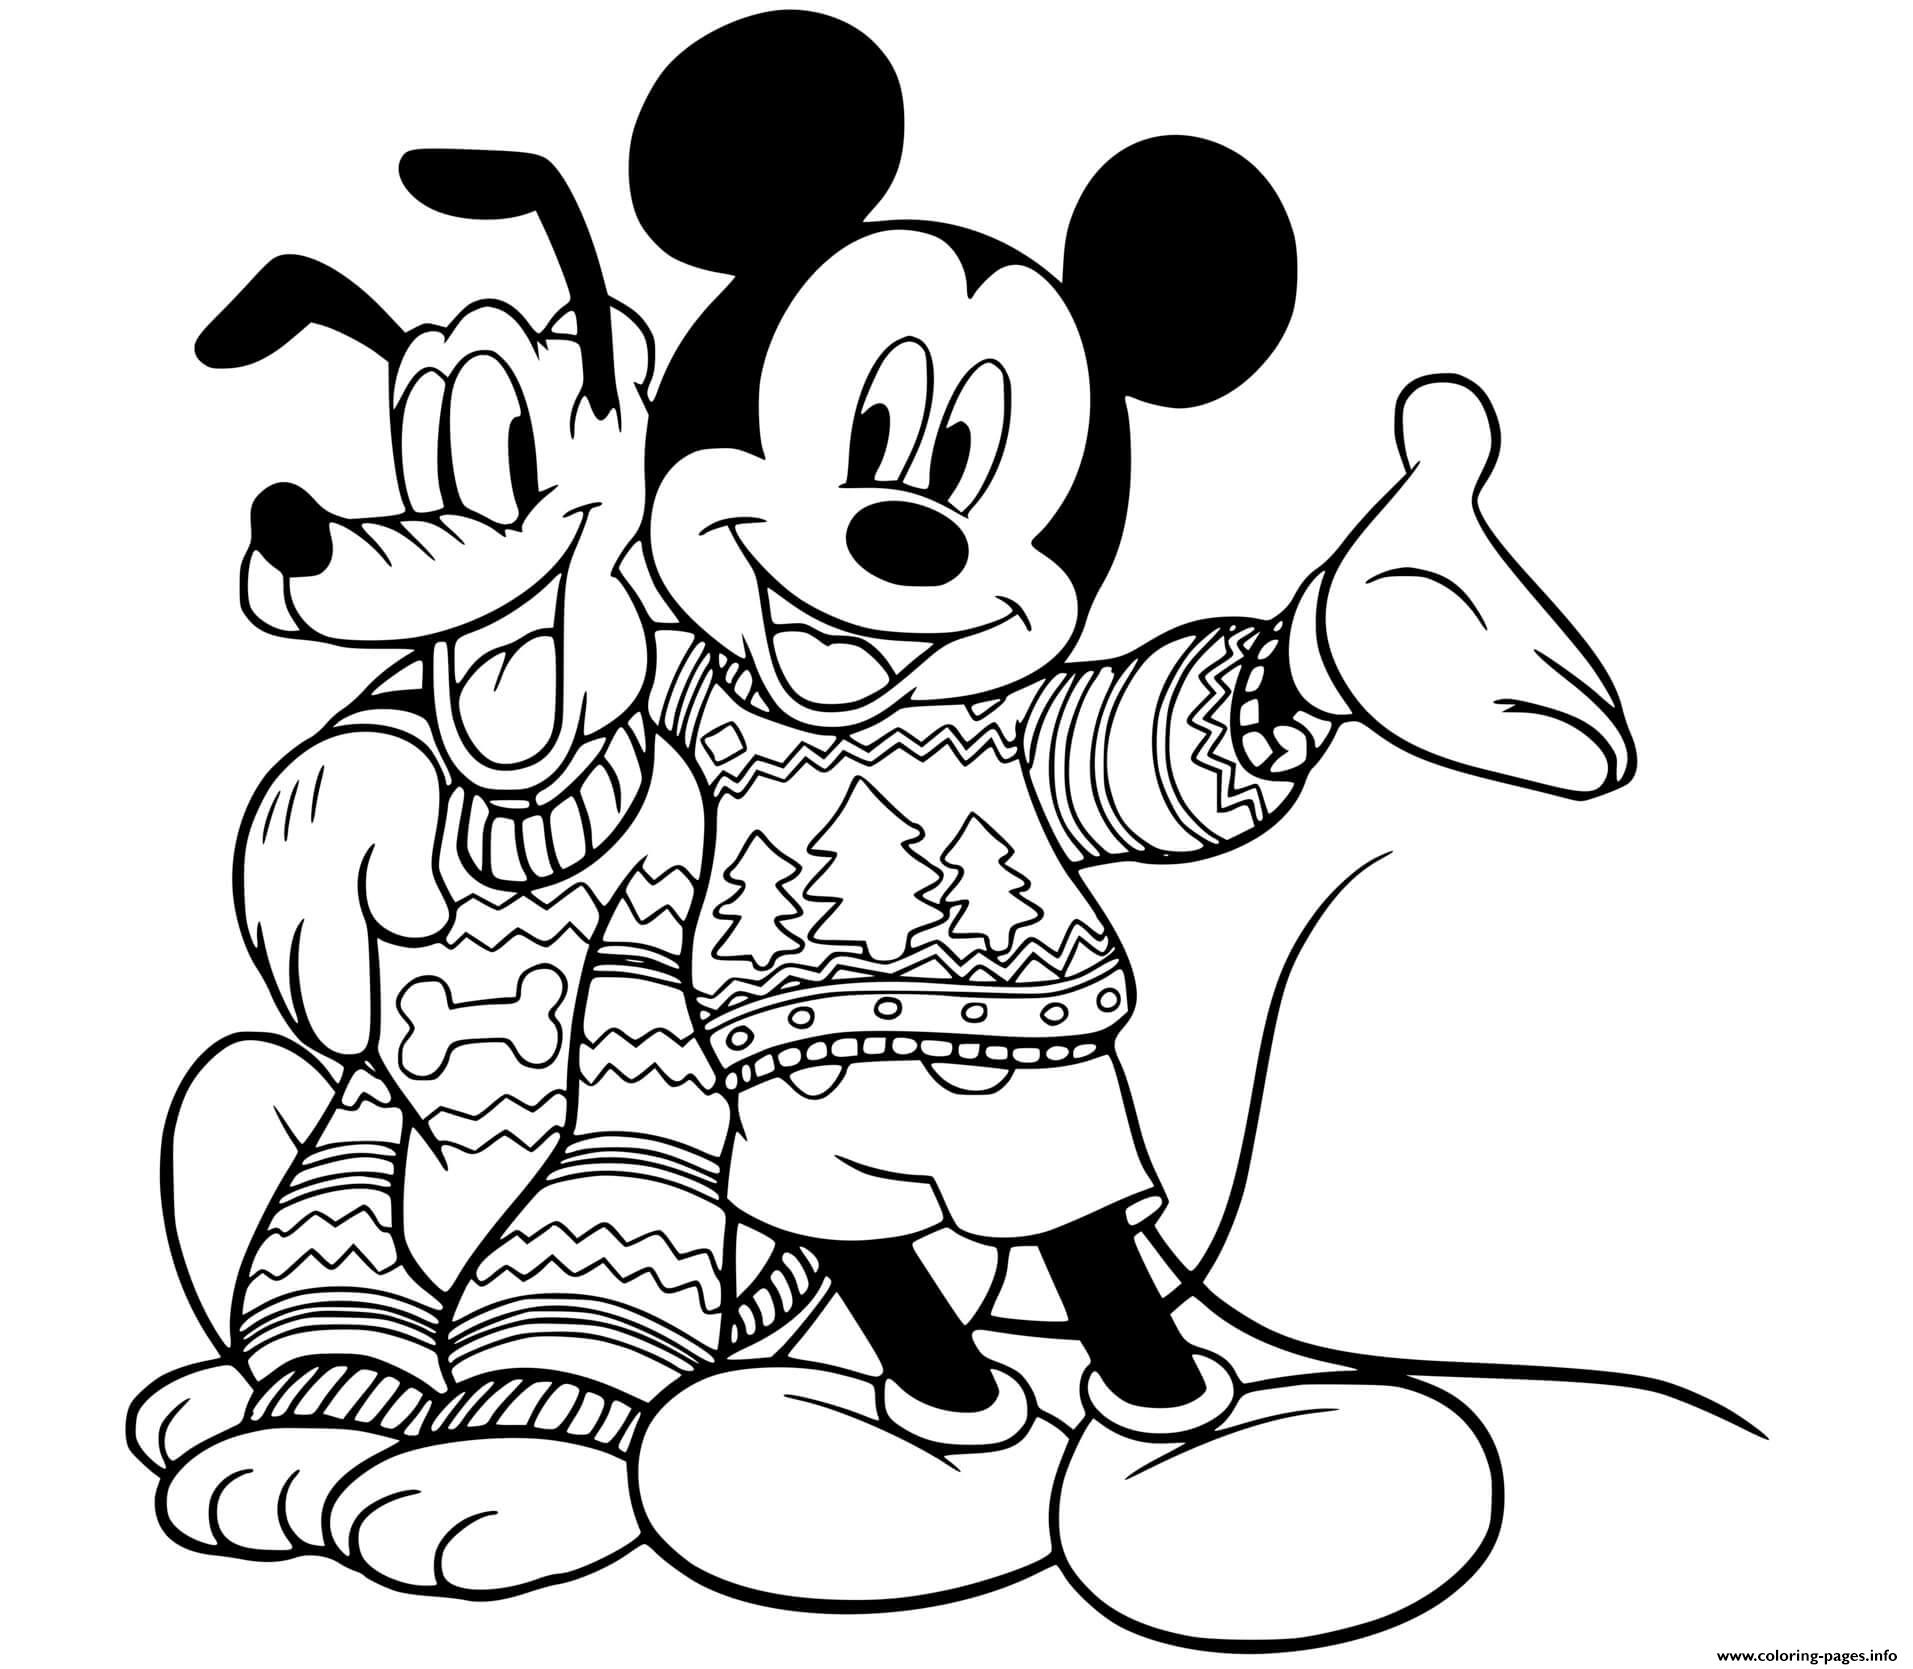 Mickey Pluto In Sweaters Coloring Pages Printable